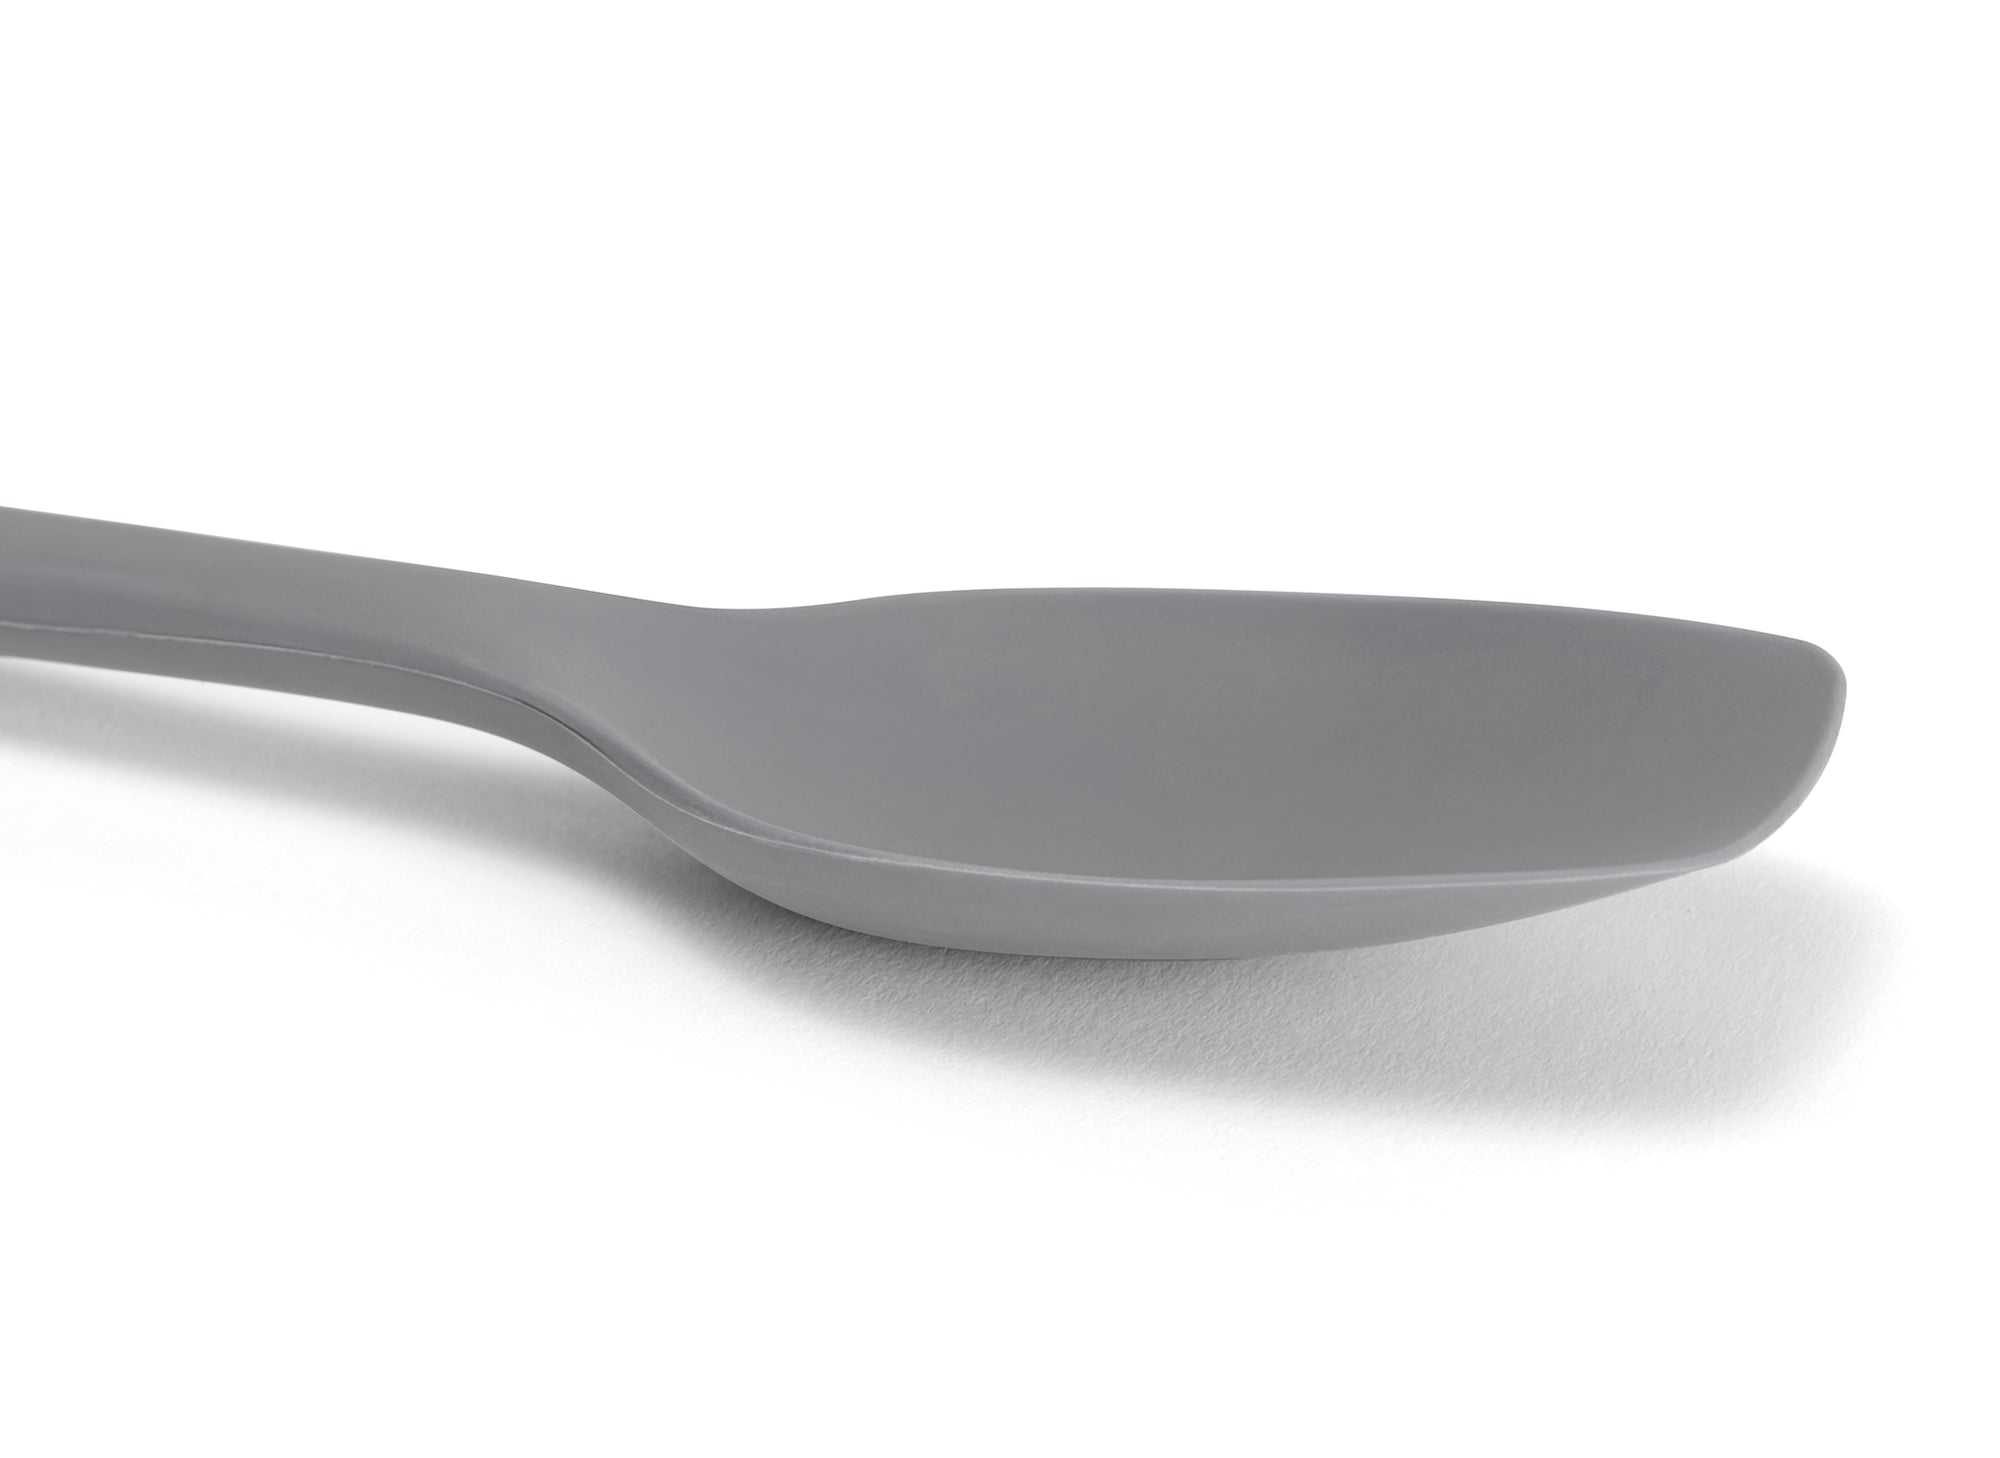 Close view of a Grey Misen Spoontula’s silicone head, deeply curved like a spoon with a spatula’s flexible rounded corners.